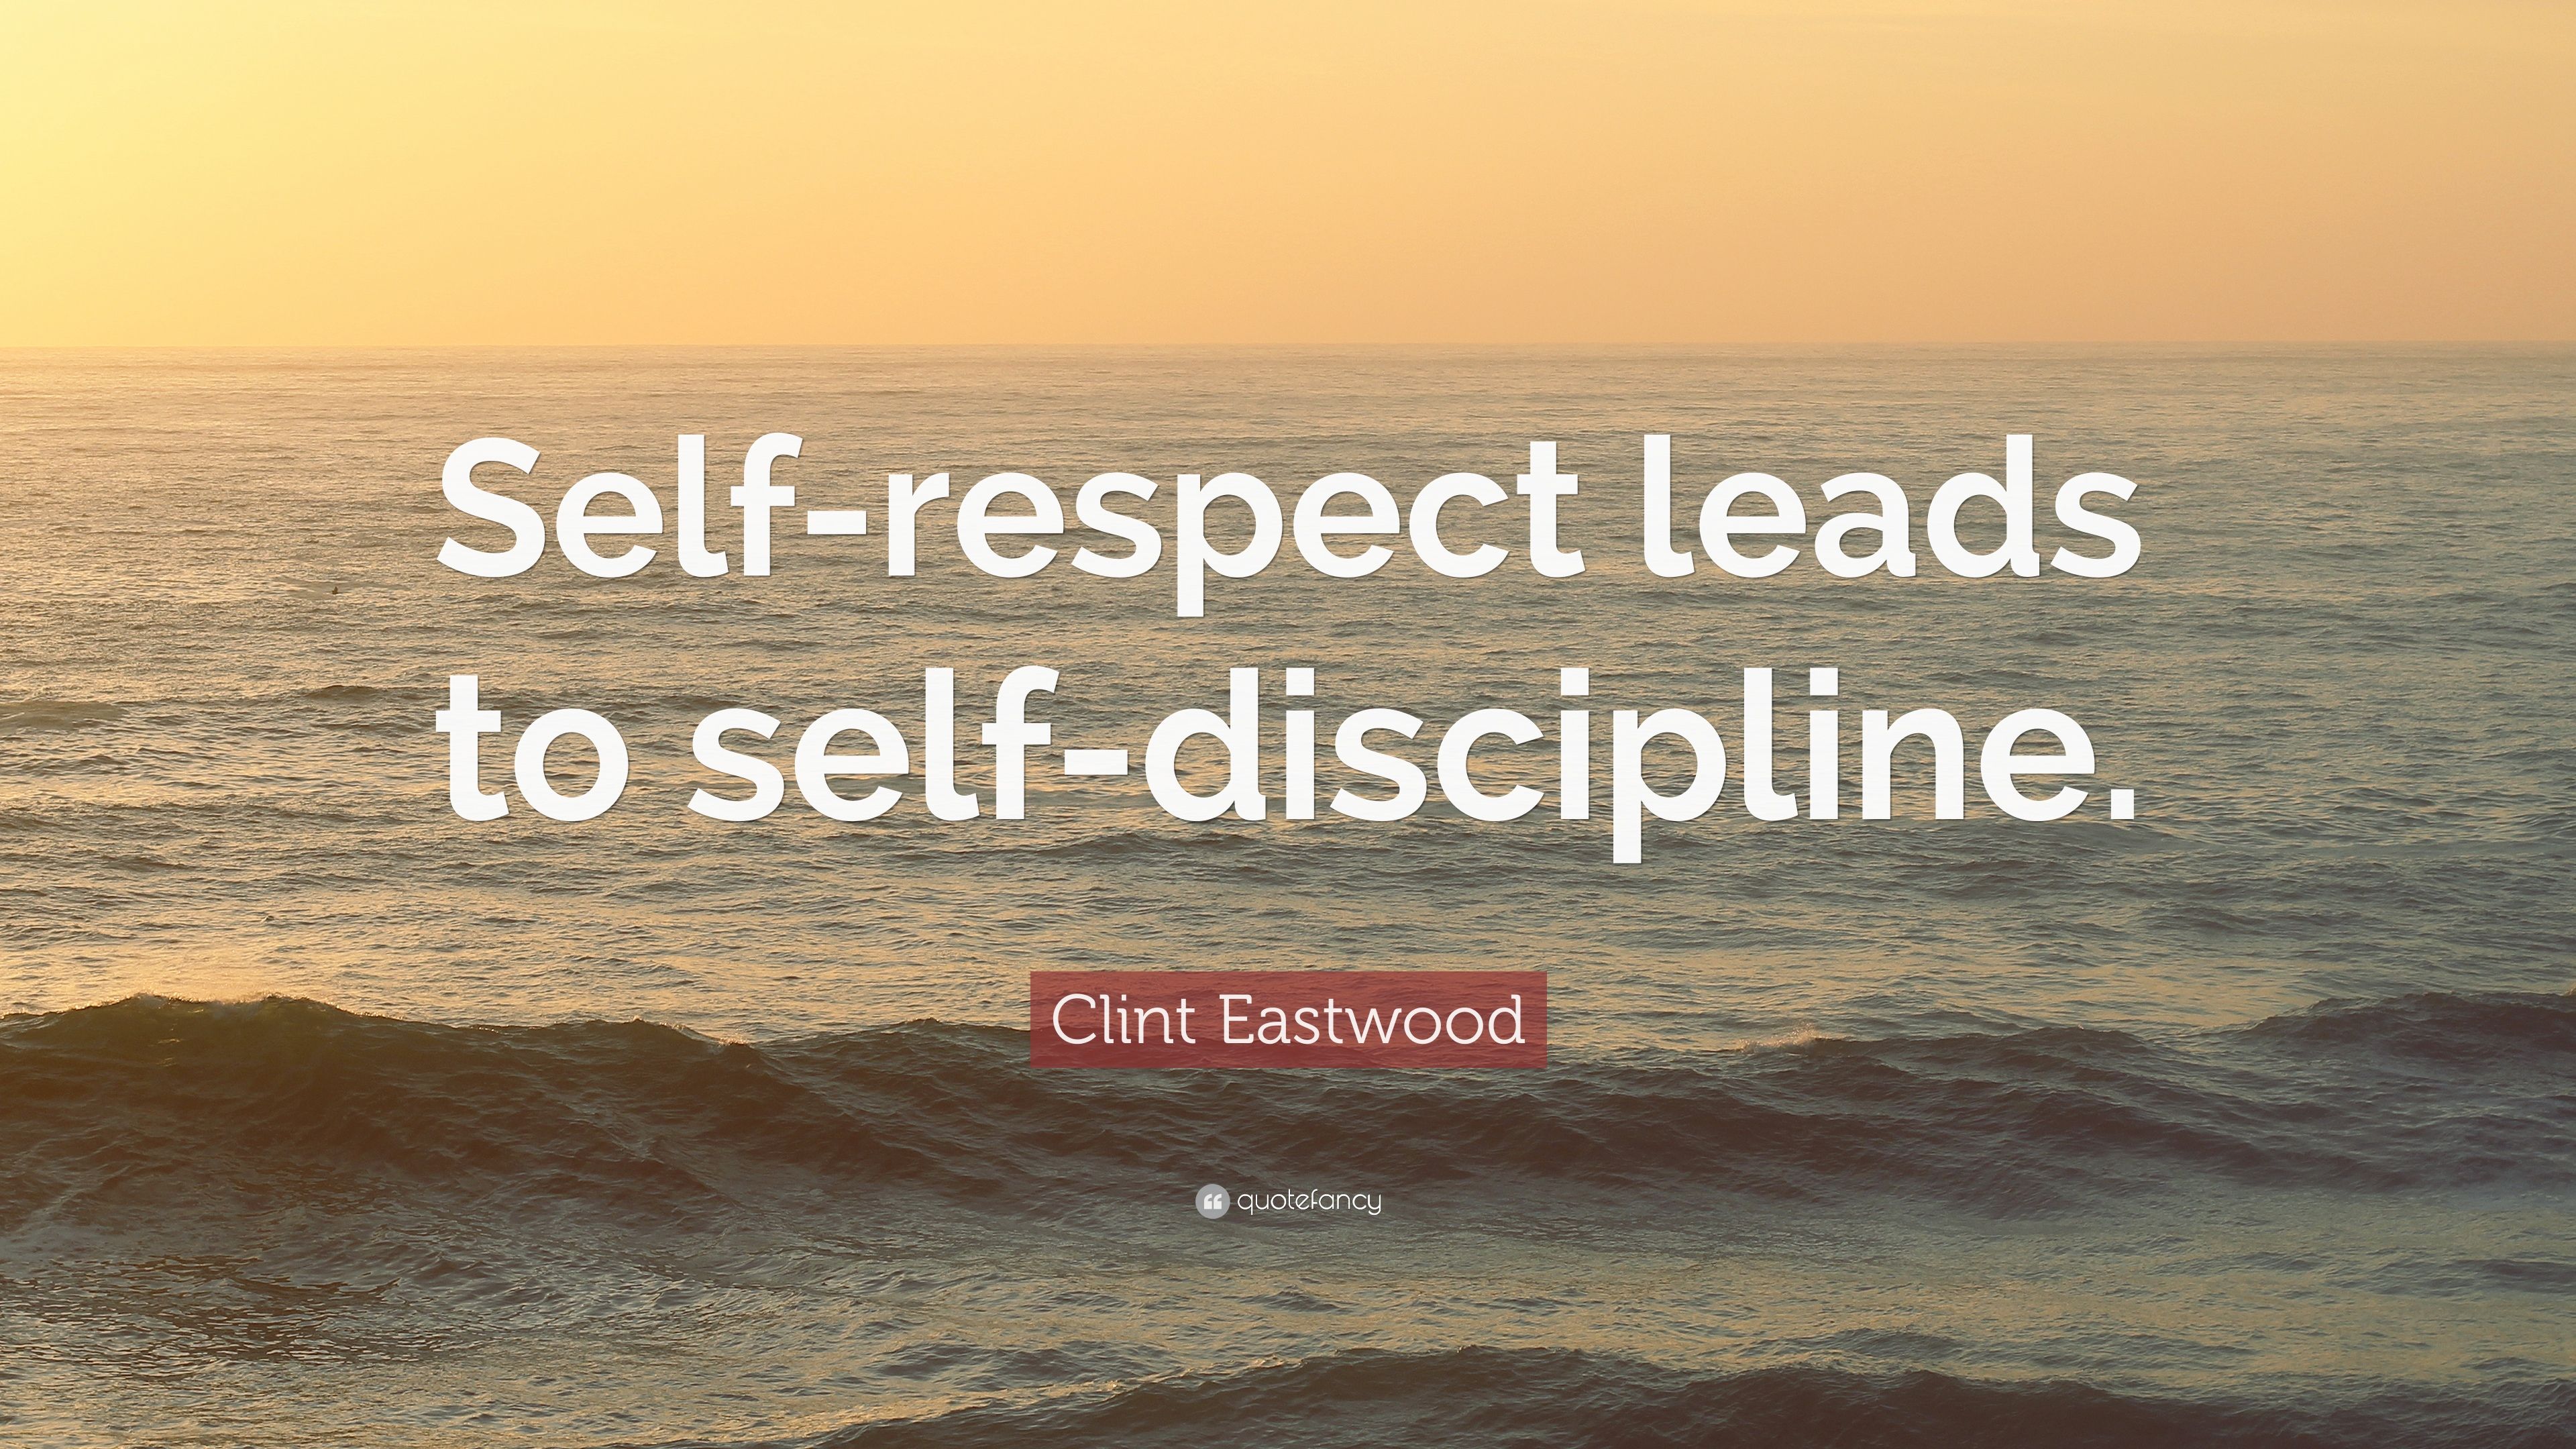 Clint Eastwood Quote: “Self Respect Leads To Self Discipline.” 12